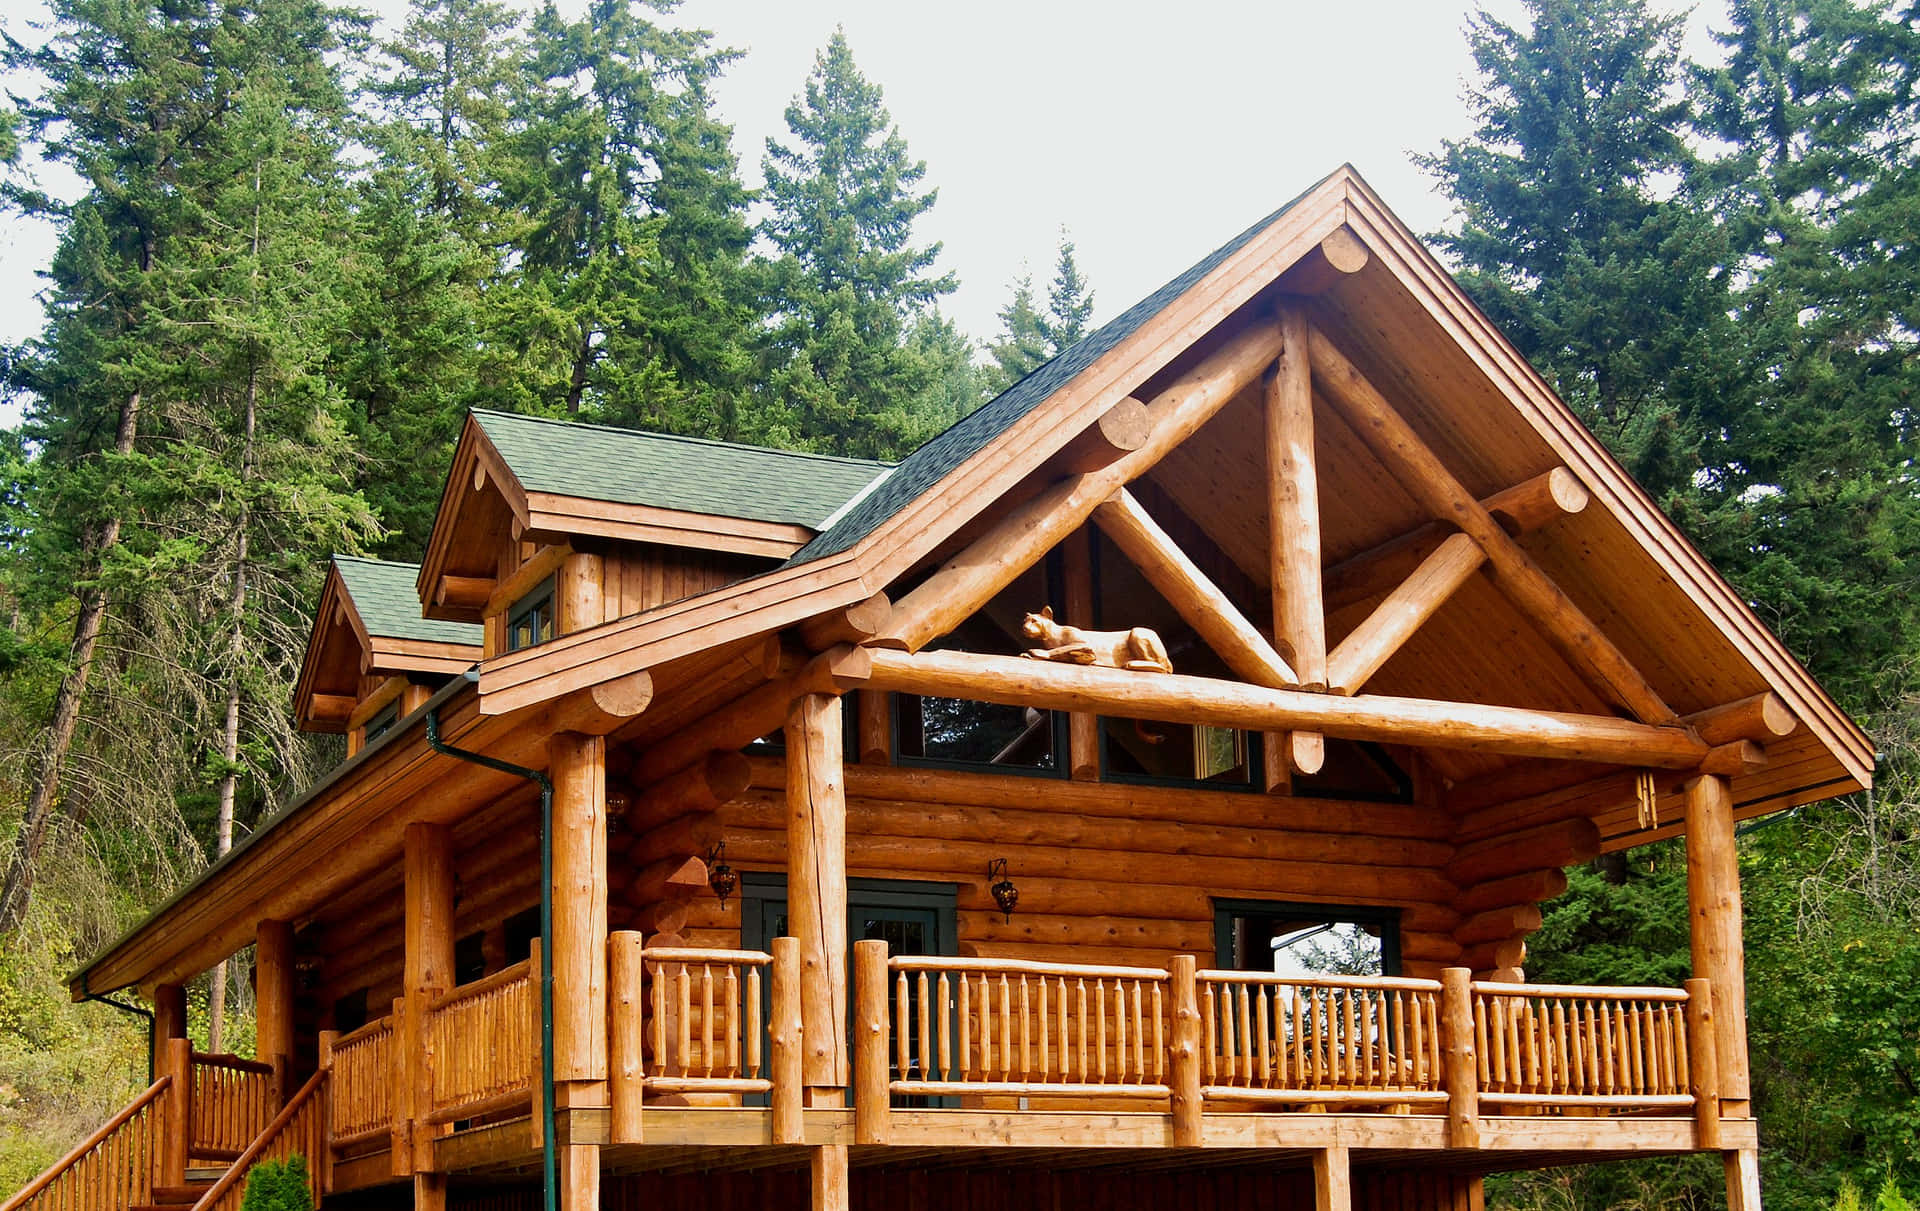 Discover a world of peace and comfort in a serene log cabin setting